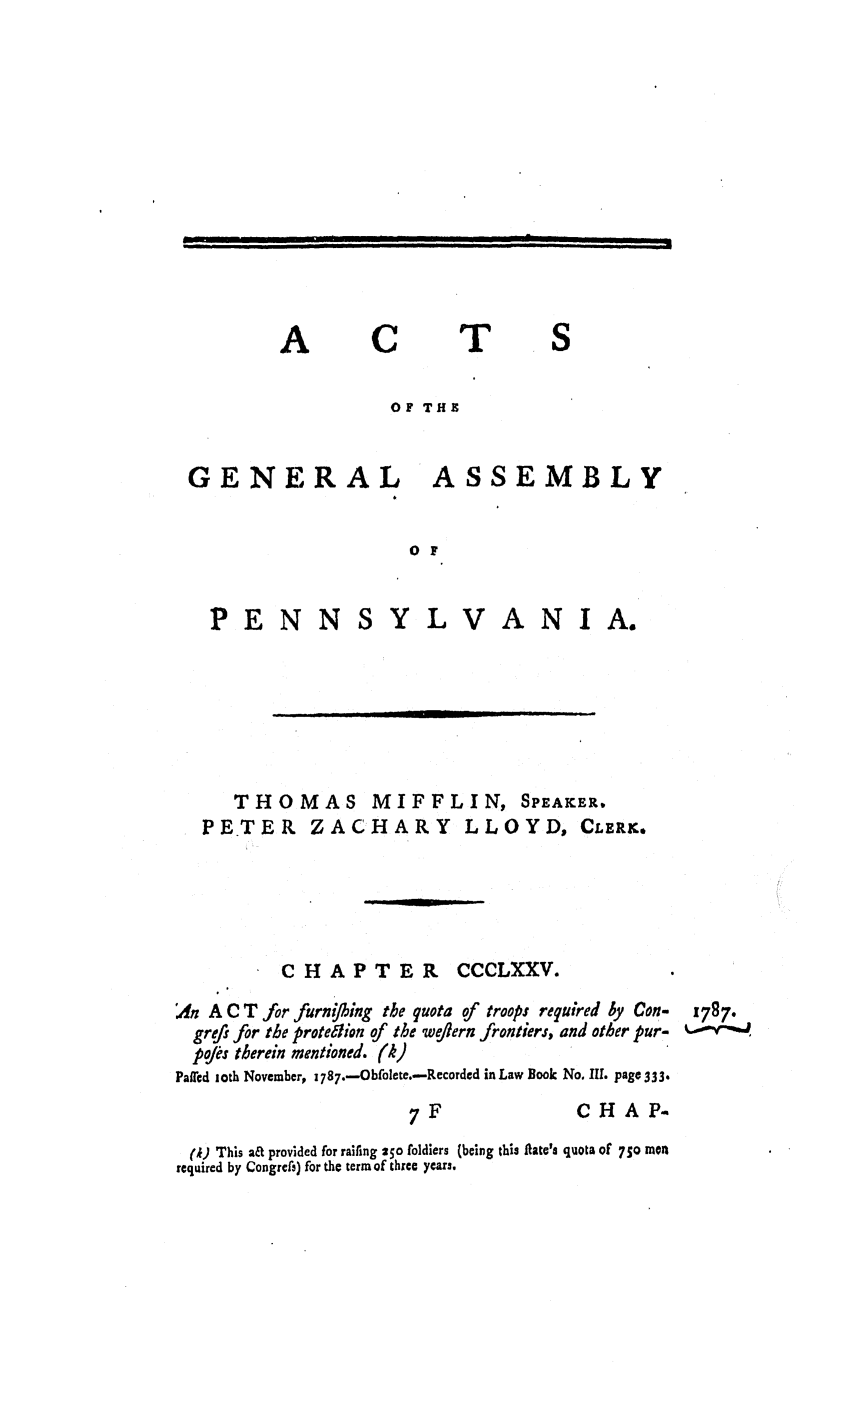 handle is hein.ssl/sspa0226 and id is 1 raw text is: A

C

T

OF THE
GENERAL ASSEMBLY
o F

PENN

YLVANIA.

THOMAS
PETER ZAC

MIFFLI
HARY L

N, SPEAKER,
LOYD, CLERK.

CHAPTER CCCLXXV.
A A C T for furning the quota of troops required by Con- 1787.
grefi for the protedhon of the weflern frontiers, and other pur-  -v
pojes therein mentioned. (k)
PaWed ,oth November, 1787.-Obfolete.-Reorded in Law Book No. IIl. page 333.

7F

CHAP.

(1) This a& provided for railing 250 foldiers (being this flate'. quota of 750 men
required by Congres) for the term of three years.

--  R I                 I      II             I    I II1|1     I         I I    III     I          I   I                                             I      III
I                           I       i                          j i         1

--               ,                         ,                                   I                   I
I                                                       I                                           J    l


